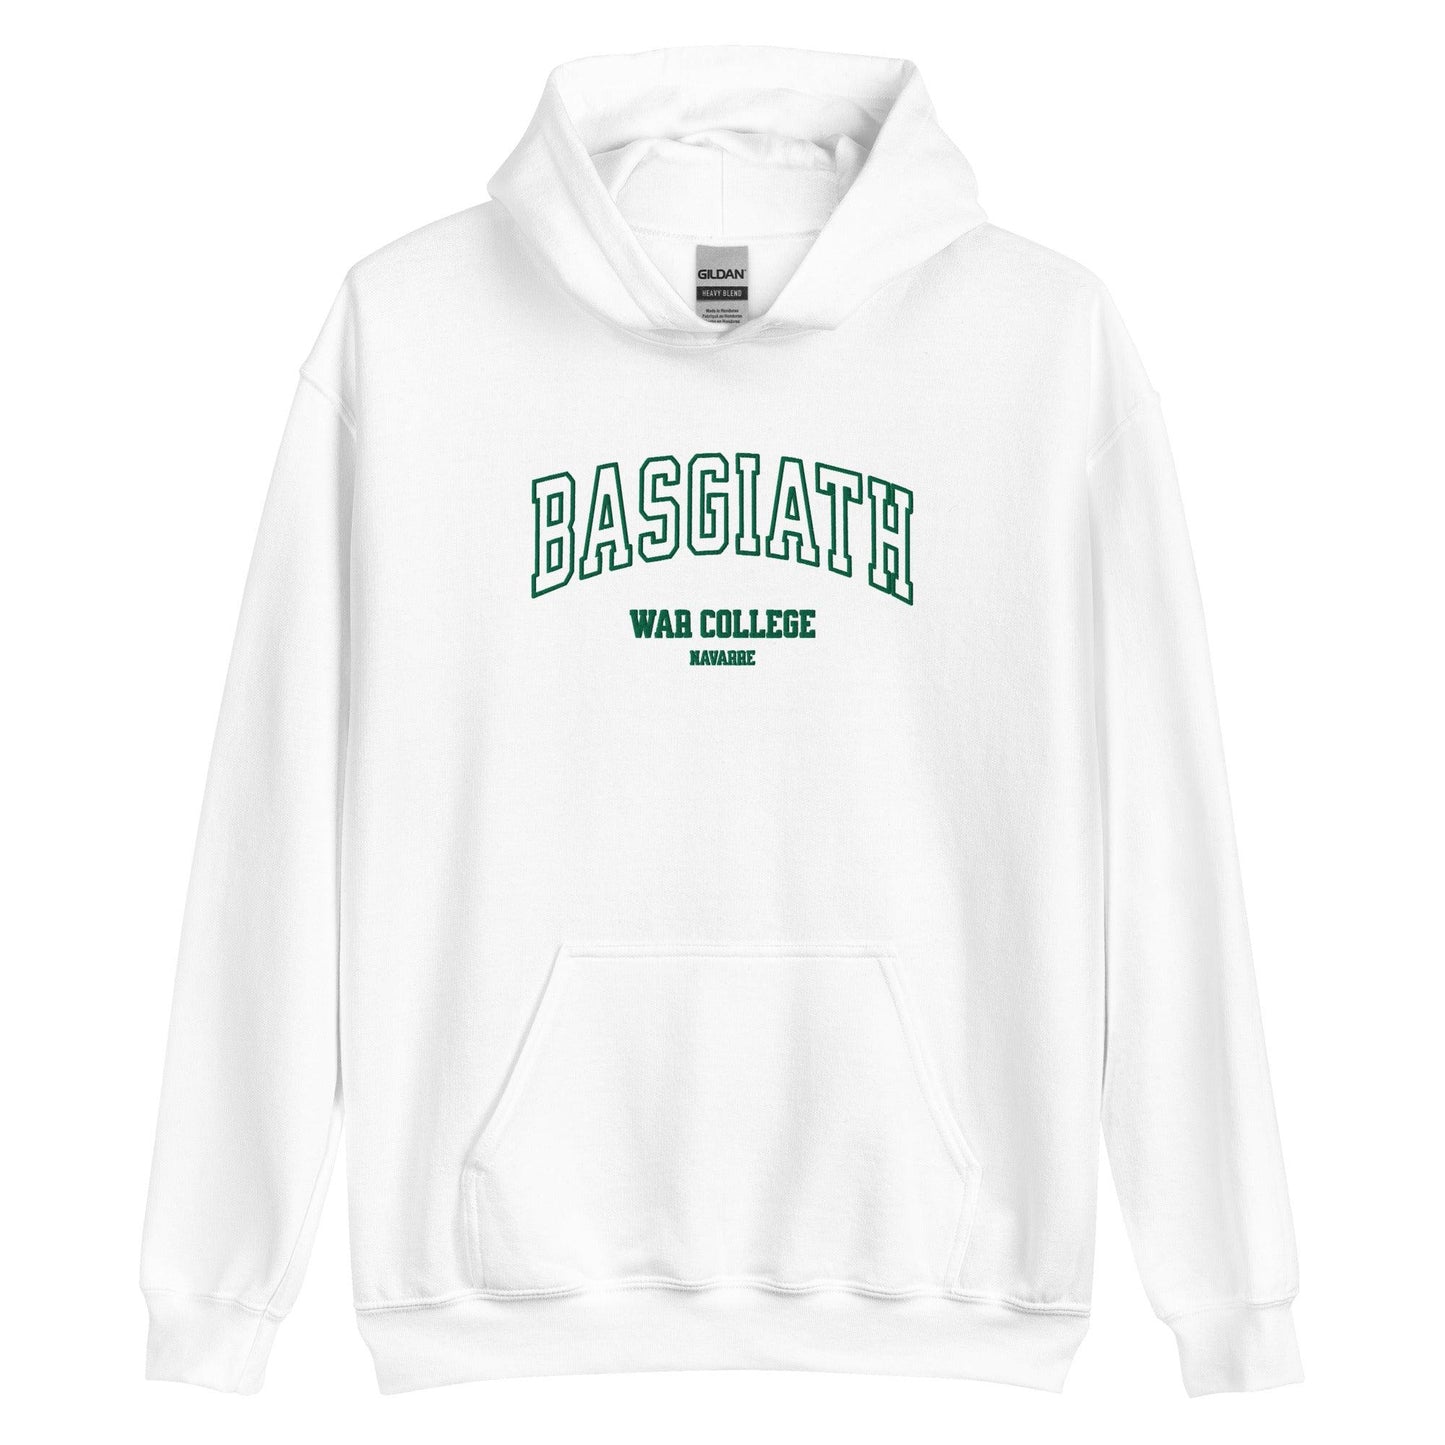 Basgiath War College Embroidered Hoodie - The Bean Workshop - embroidered, fourth wing, hoodie, rebecca yarros